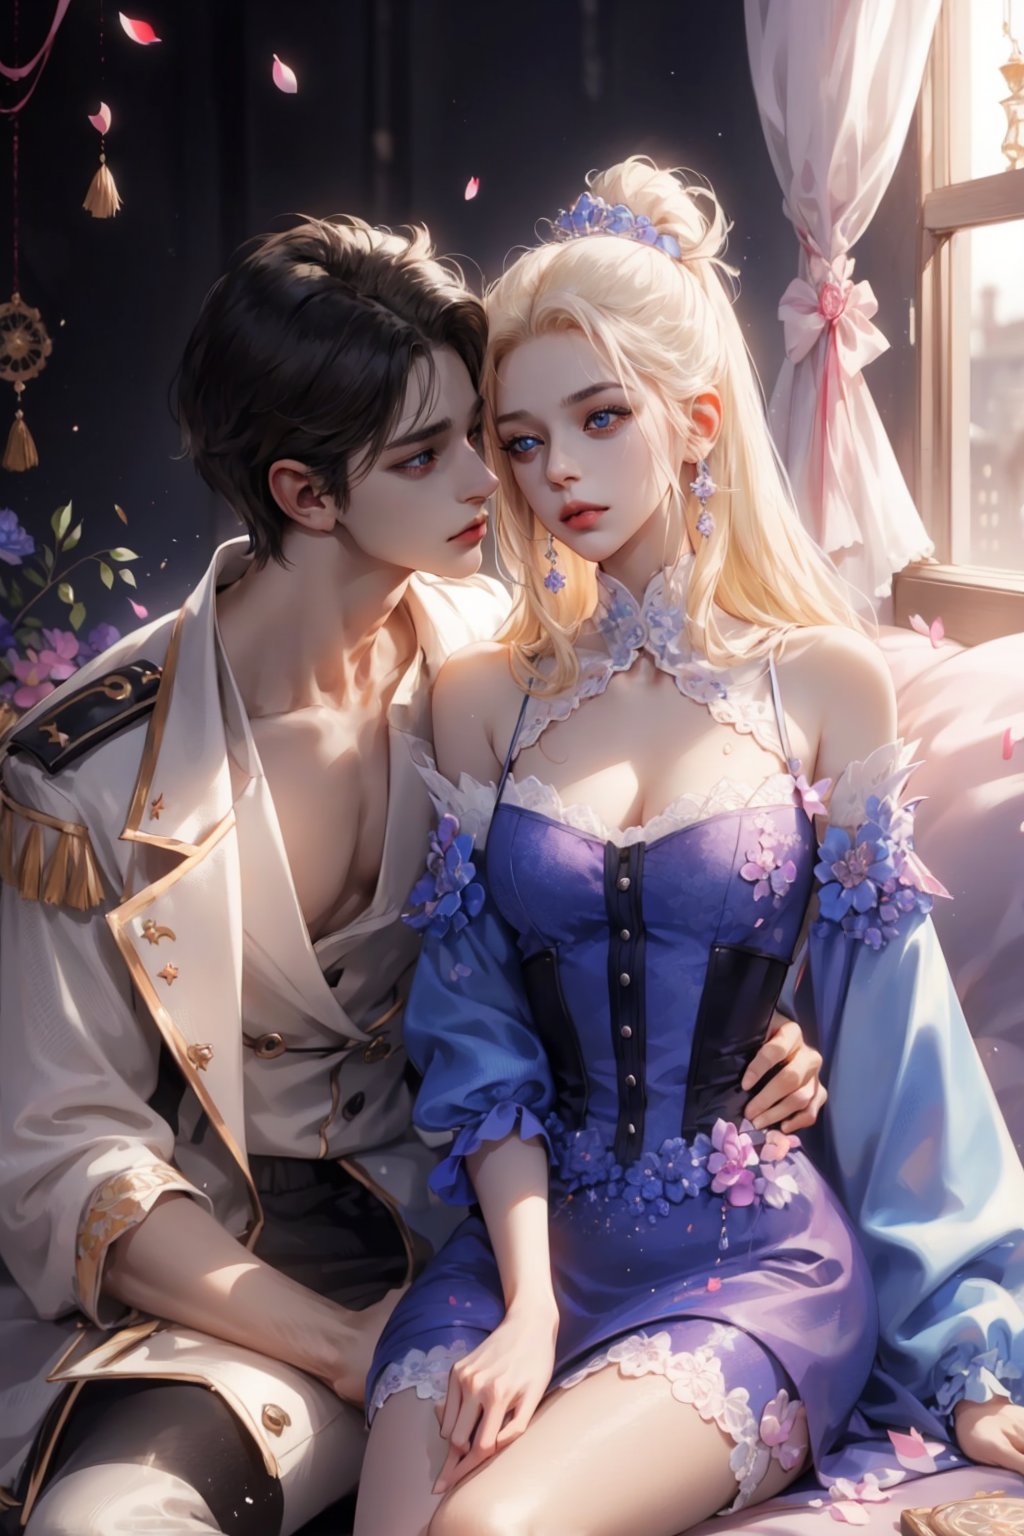 (asterpiece:1.2, best quality), (Soft light), (shiny skin), duo, kissing, 2person, couple_(romantic), man_short_black_hair, black_hair_boy, Black_hair, hateful look, 1man, 1girl, eye_lashes, collarbone, victorian, blue eyes, blonde_long_ hair_girl, black_short_hair_man, royalty background, sexual, flowers petals, french_kiss, sitting on the bed, kissing